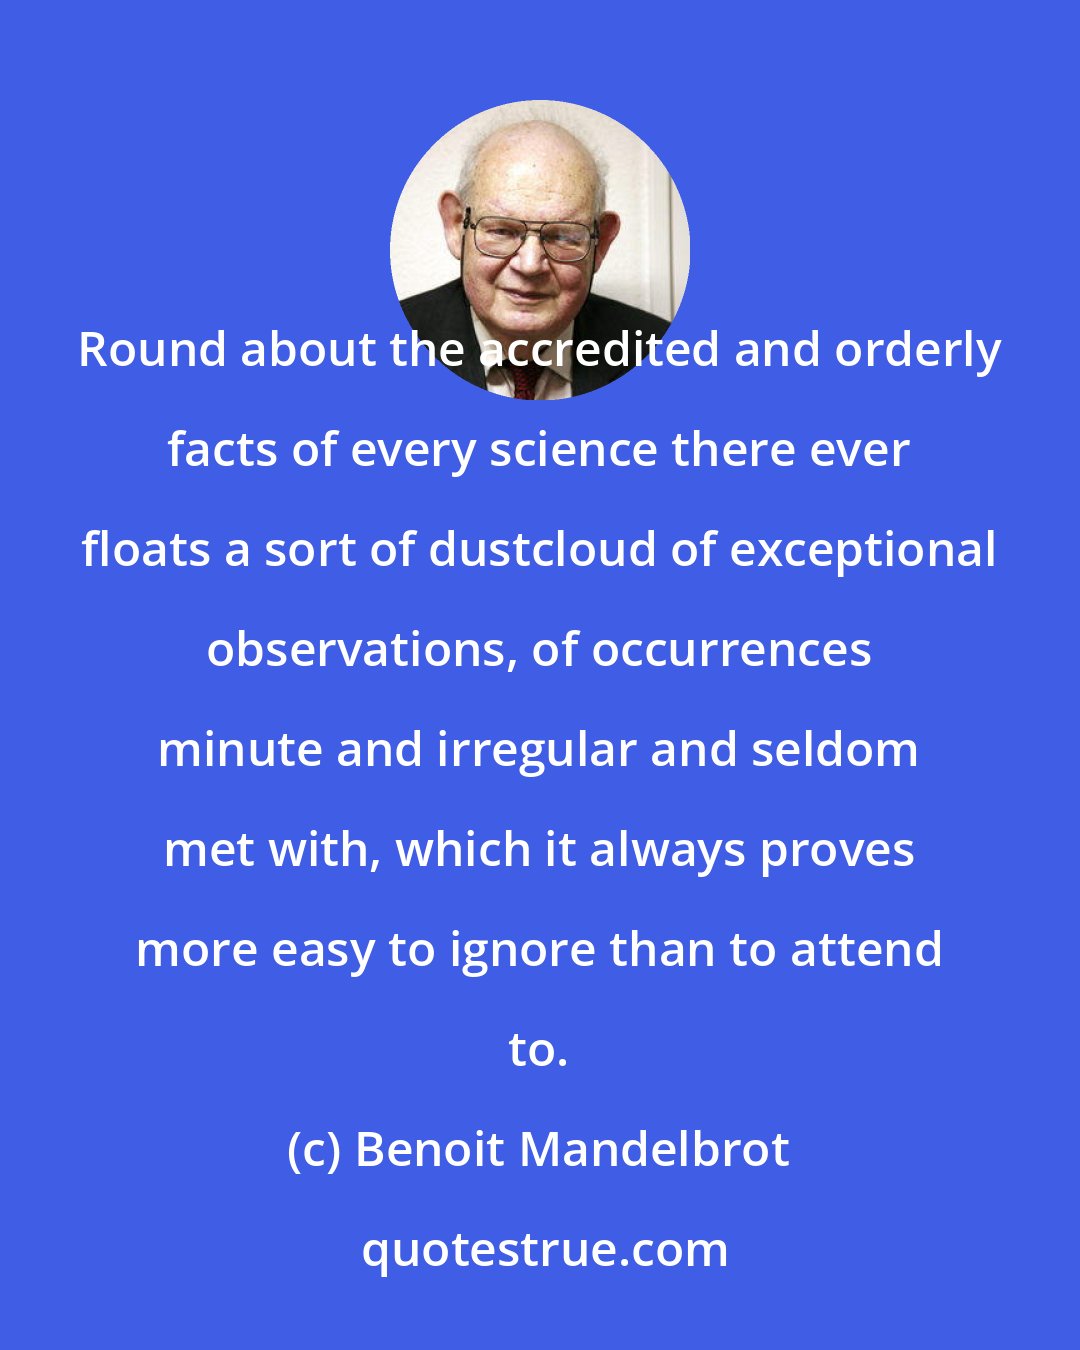 Benoit Mandelbrot: Round about the accredited and orderly facts of every science there ever floats a sort of dustcloud of exceptional observations, of occurrences minute and irregular and seldom met with, which it always proves more easy to ignore than to attend to.